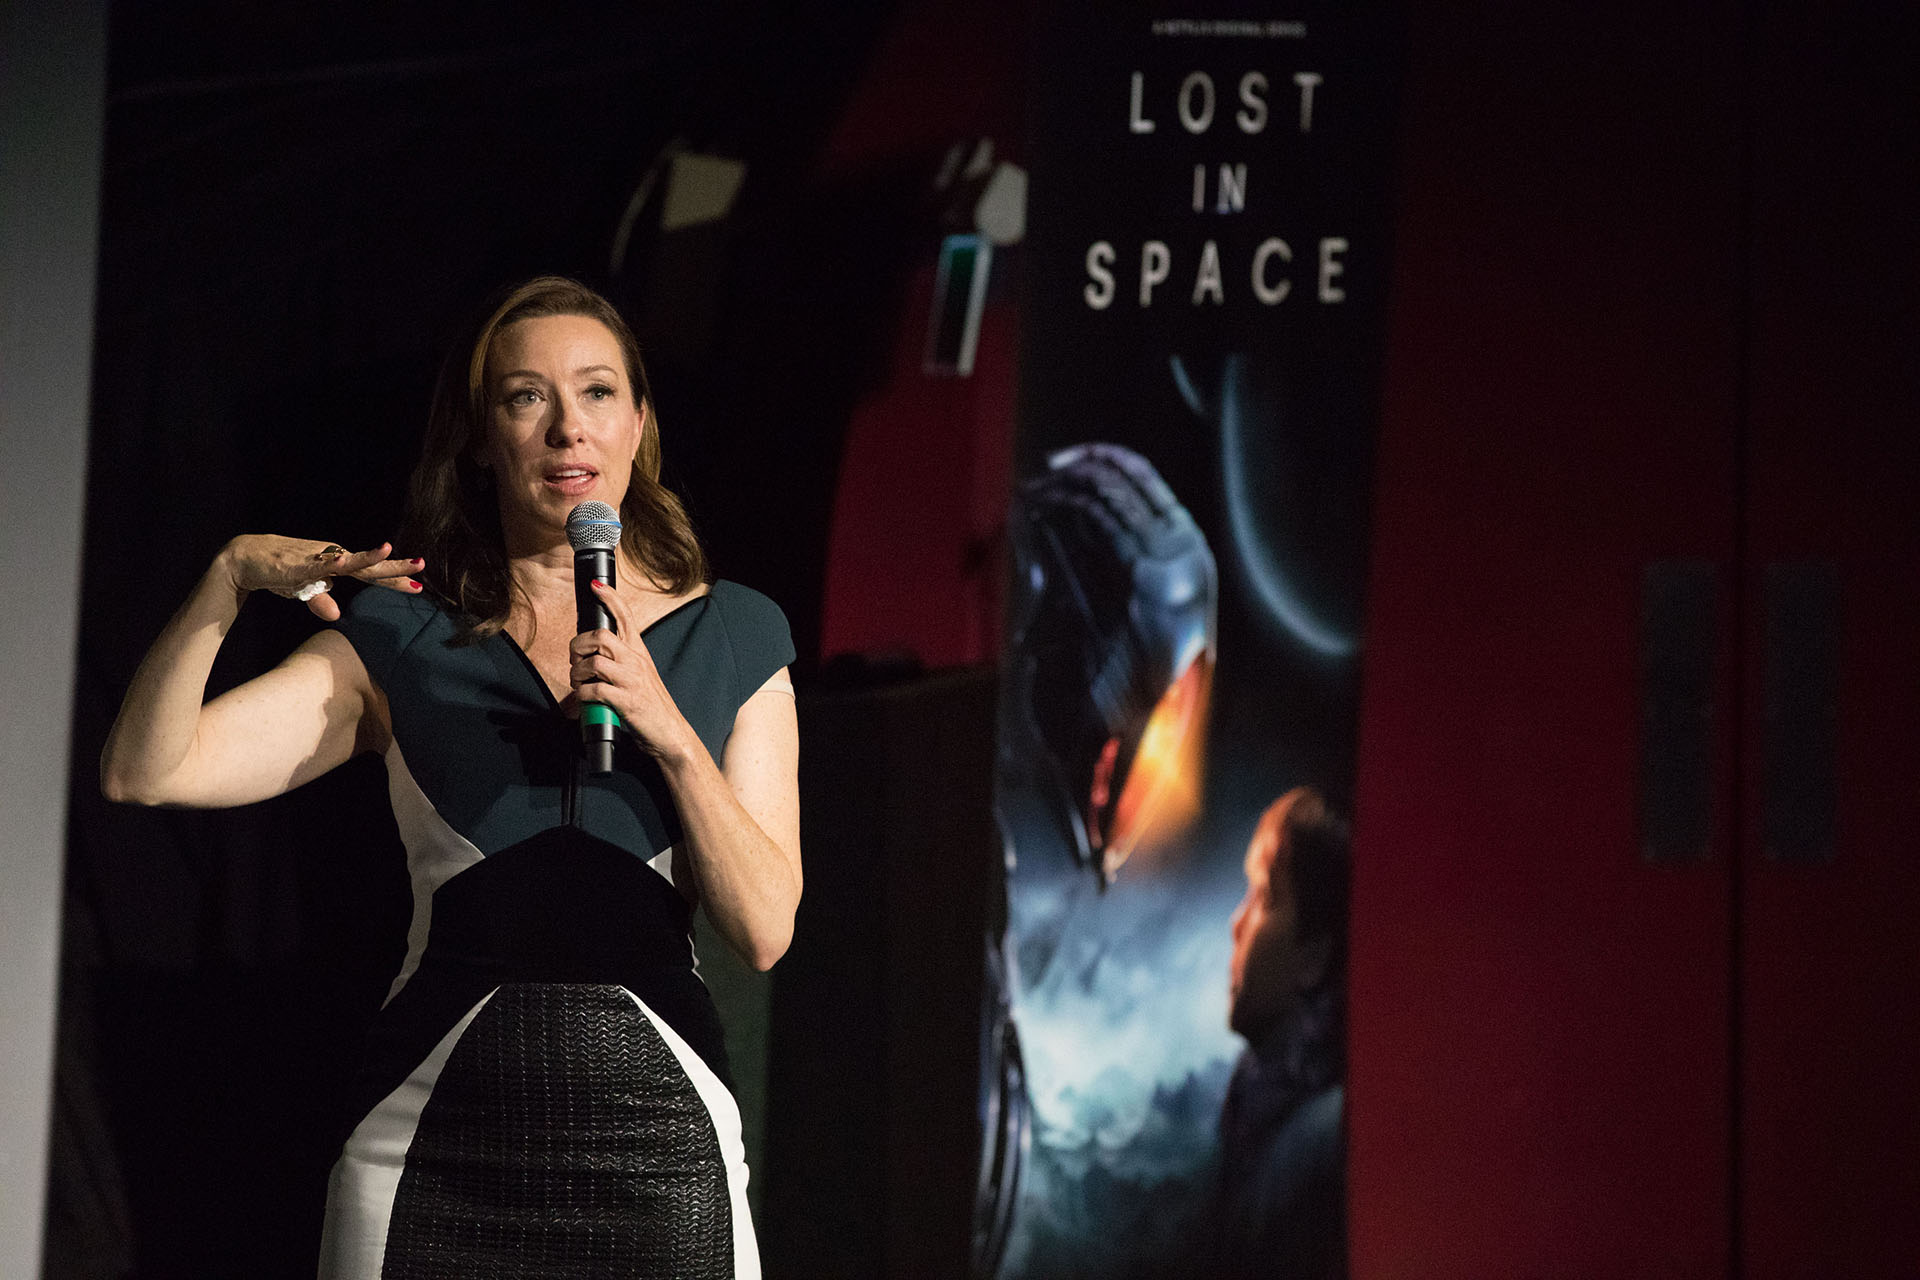 Molly Parker wearing a dress and holding a mic in front of a Lost in Space sign